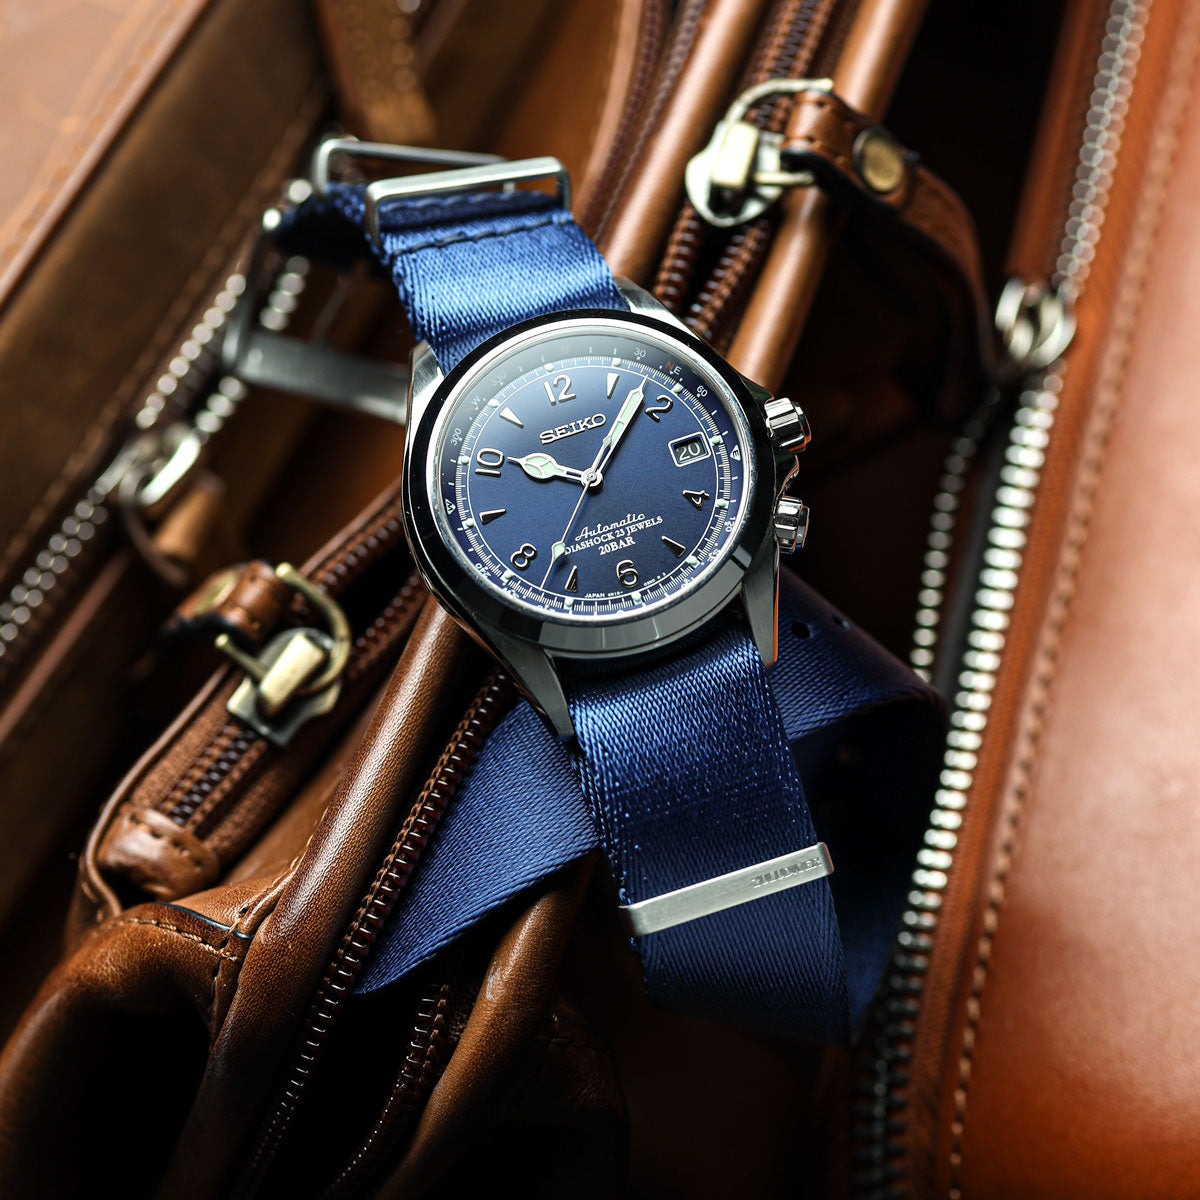 1973 British Military Watch Strap: ARMOURED RECON - Navy Blue, Polished